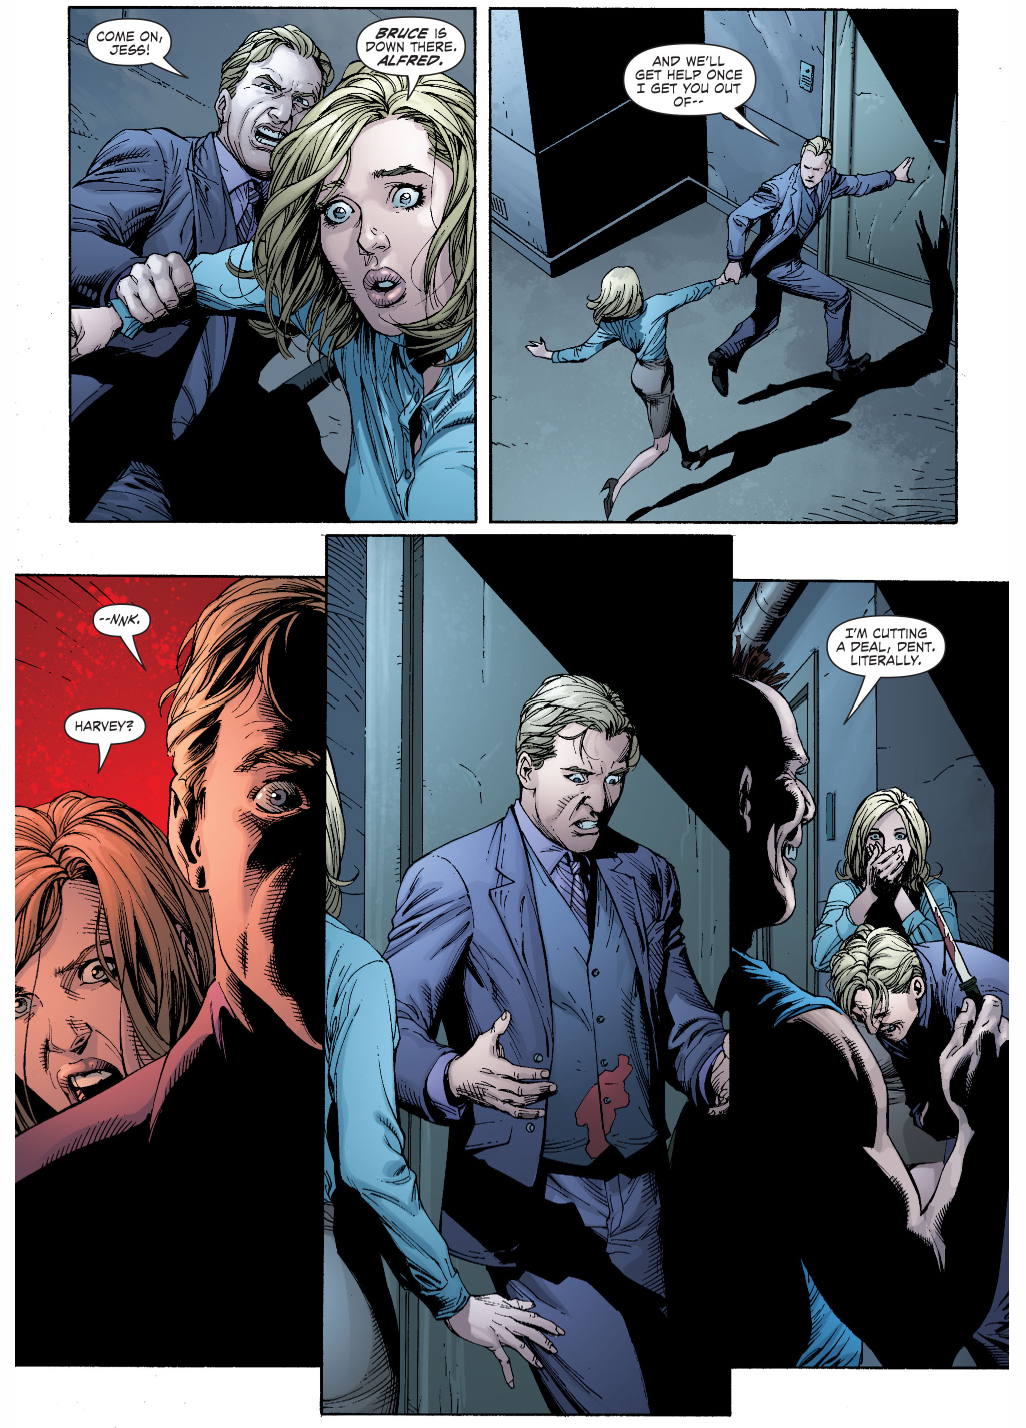 harvey dent's face is burned off (earth 1)